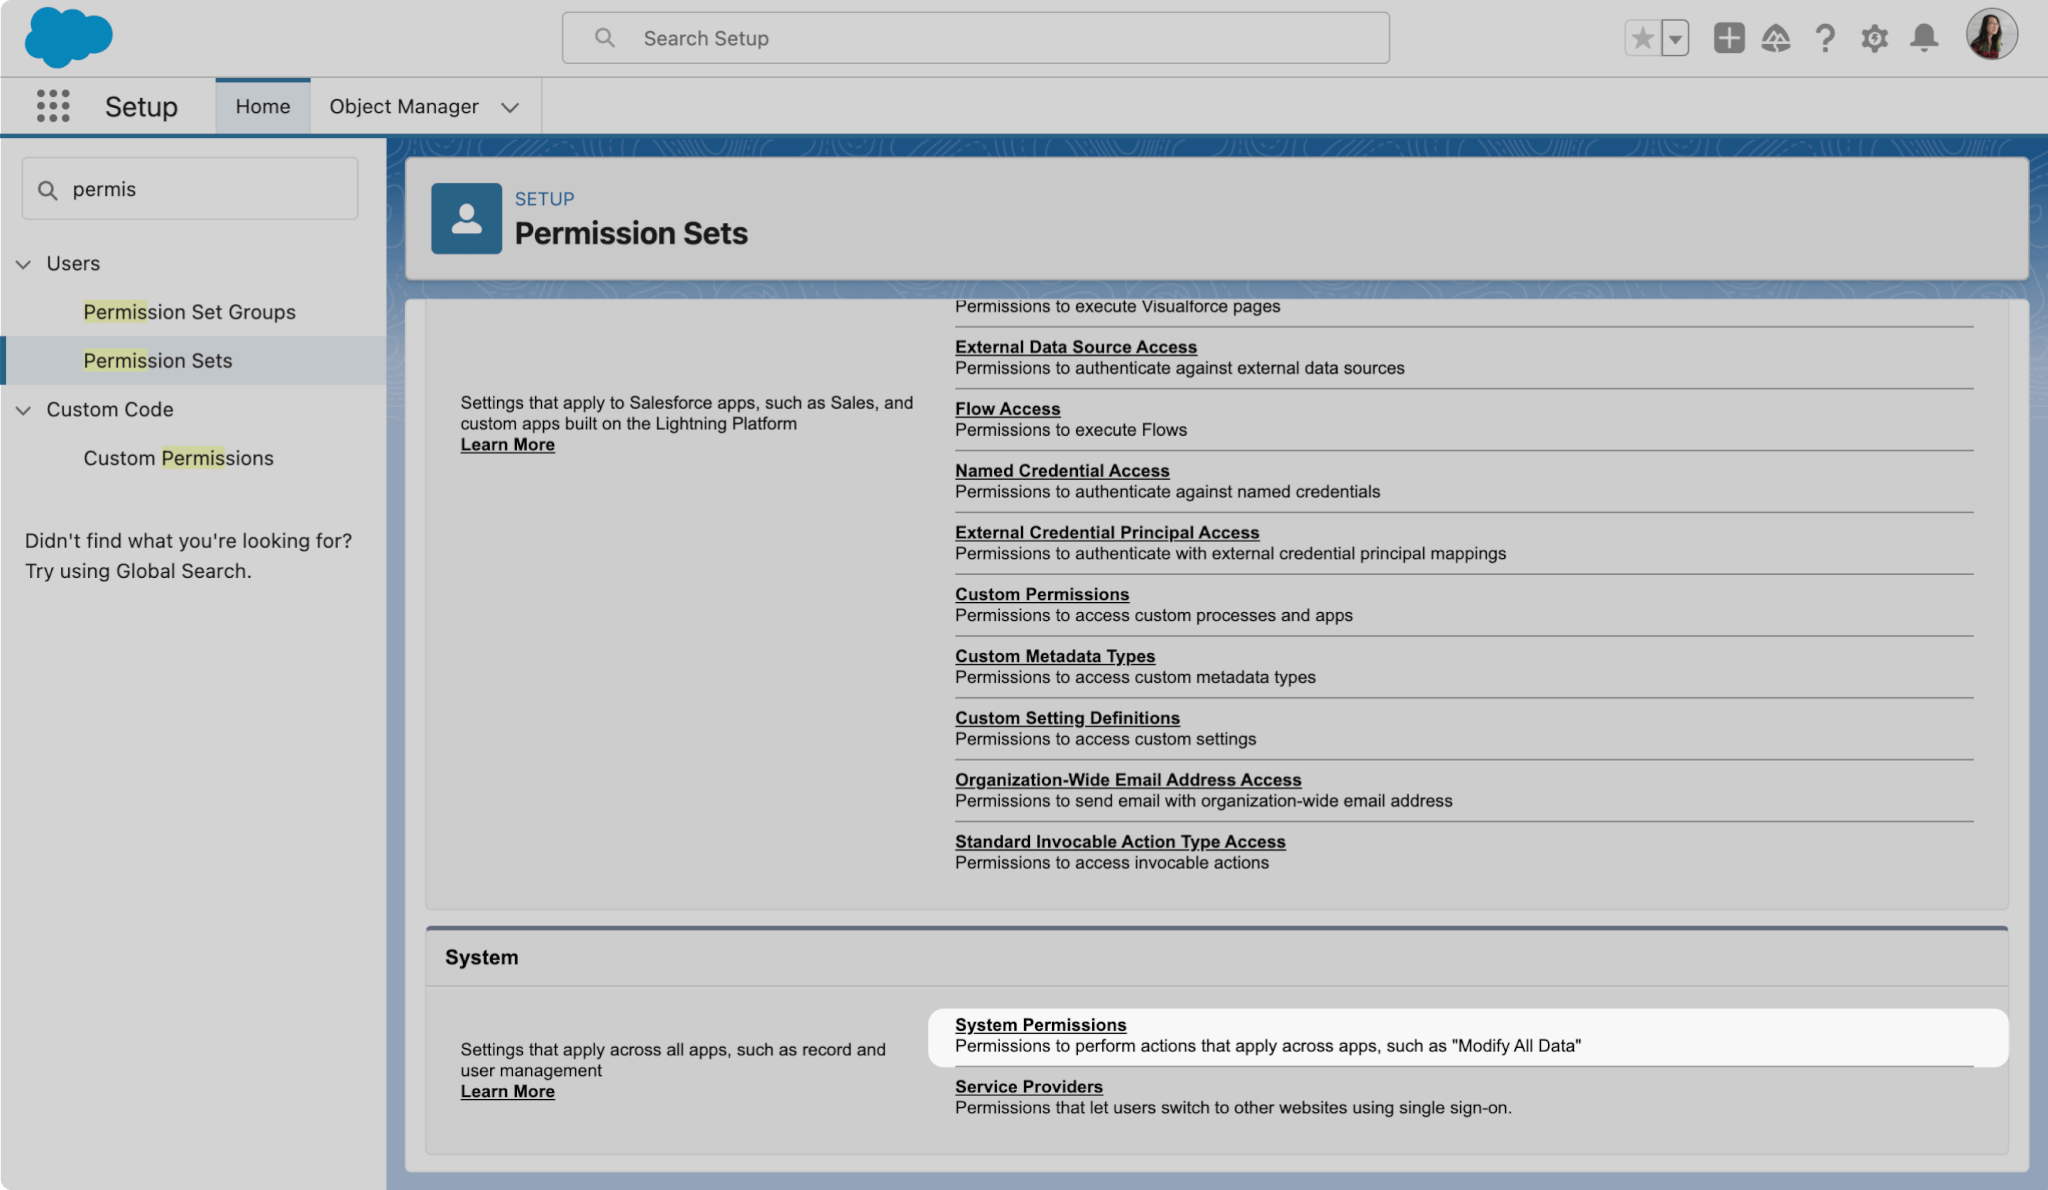 System Permissions options highlighted within Permission Sets edit screen